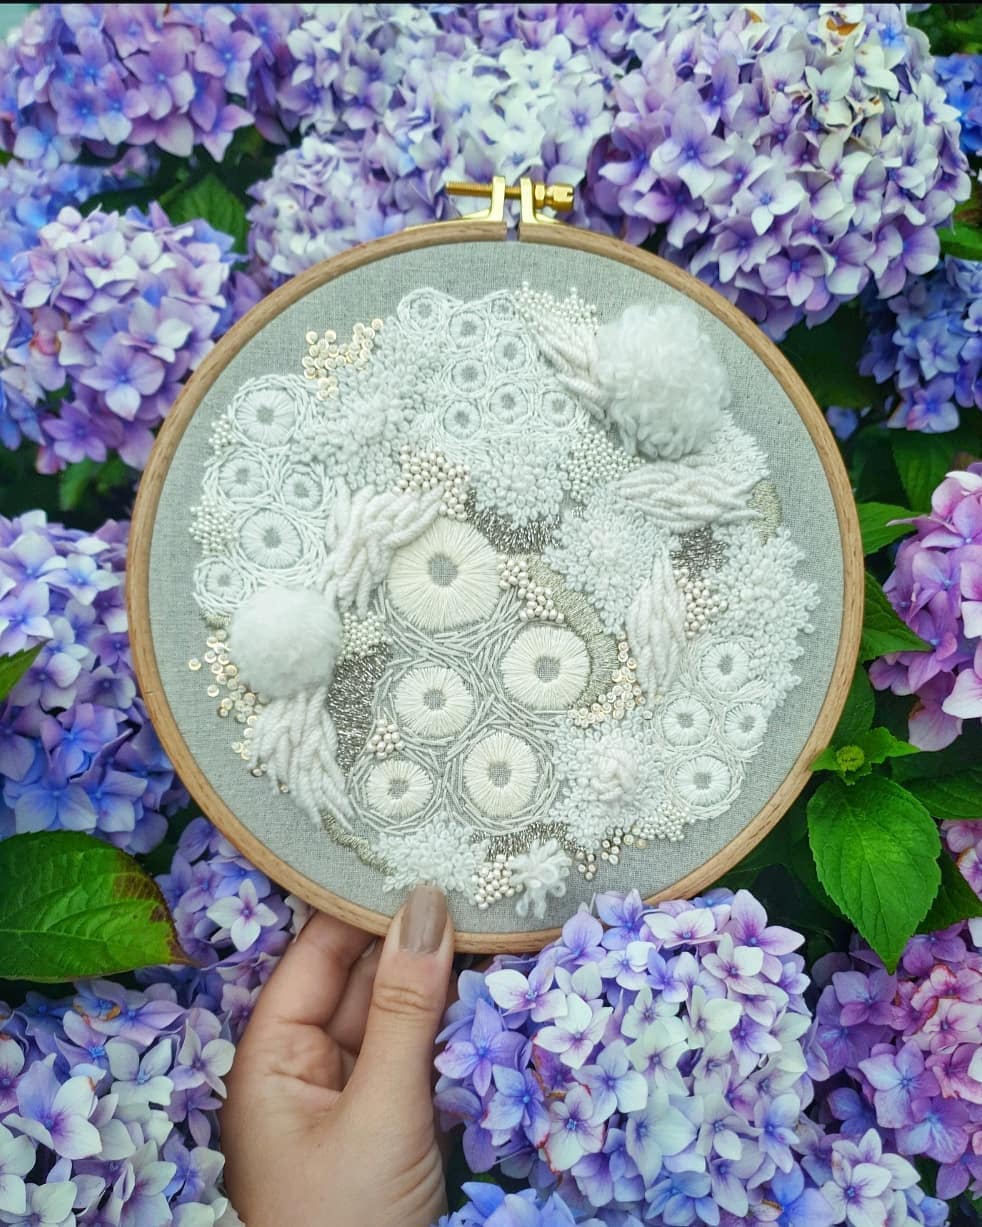 Marvelous Embroideries Inspired By Moss, Coral, And Lichen Forms By Hannah Kwasnycia (13)